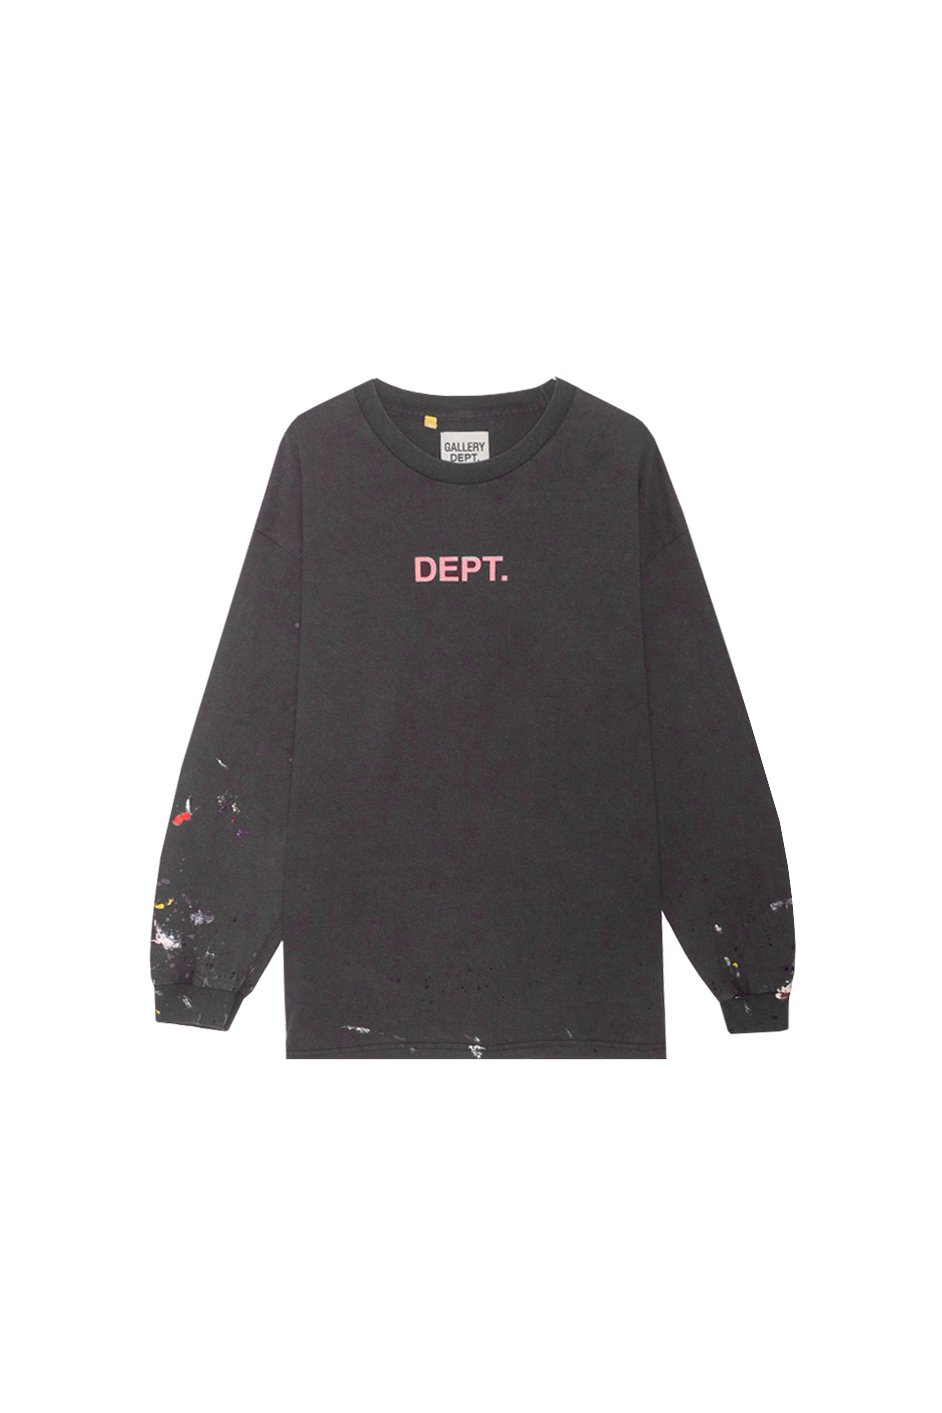 Centered Logo Dept L/S Tee Painted